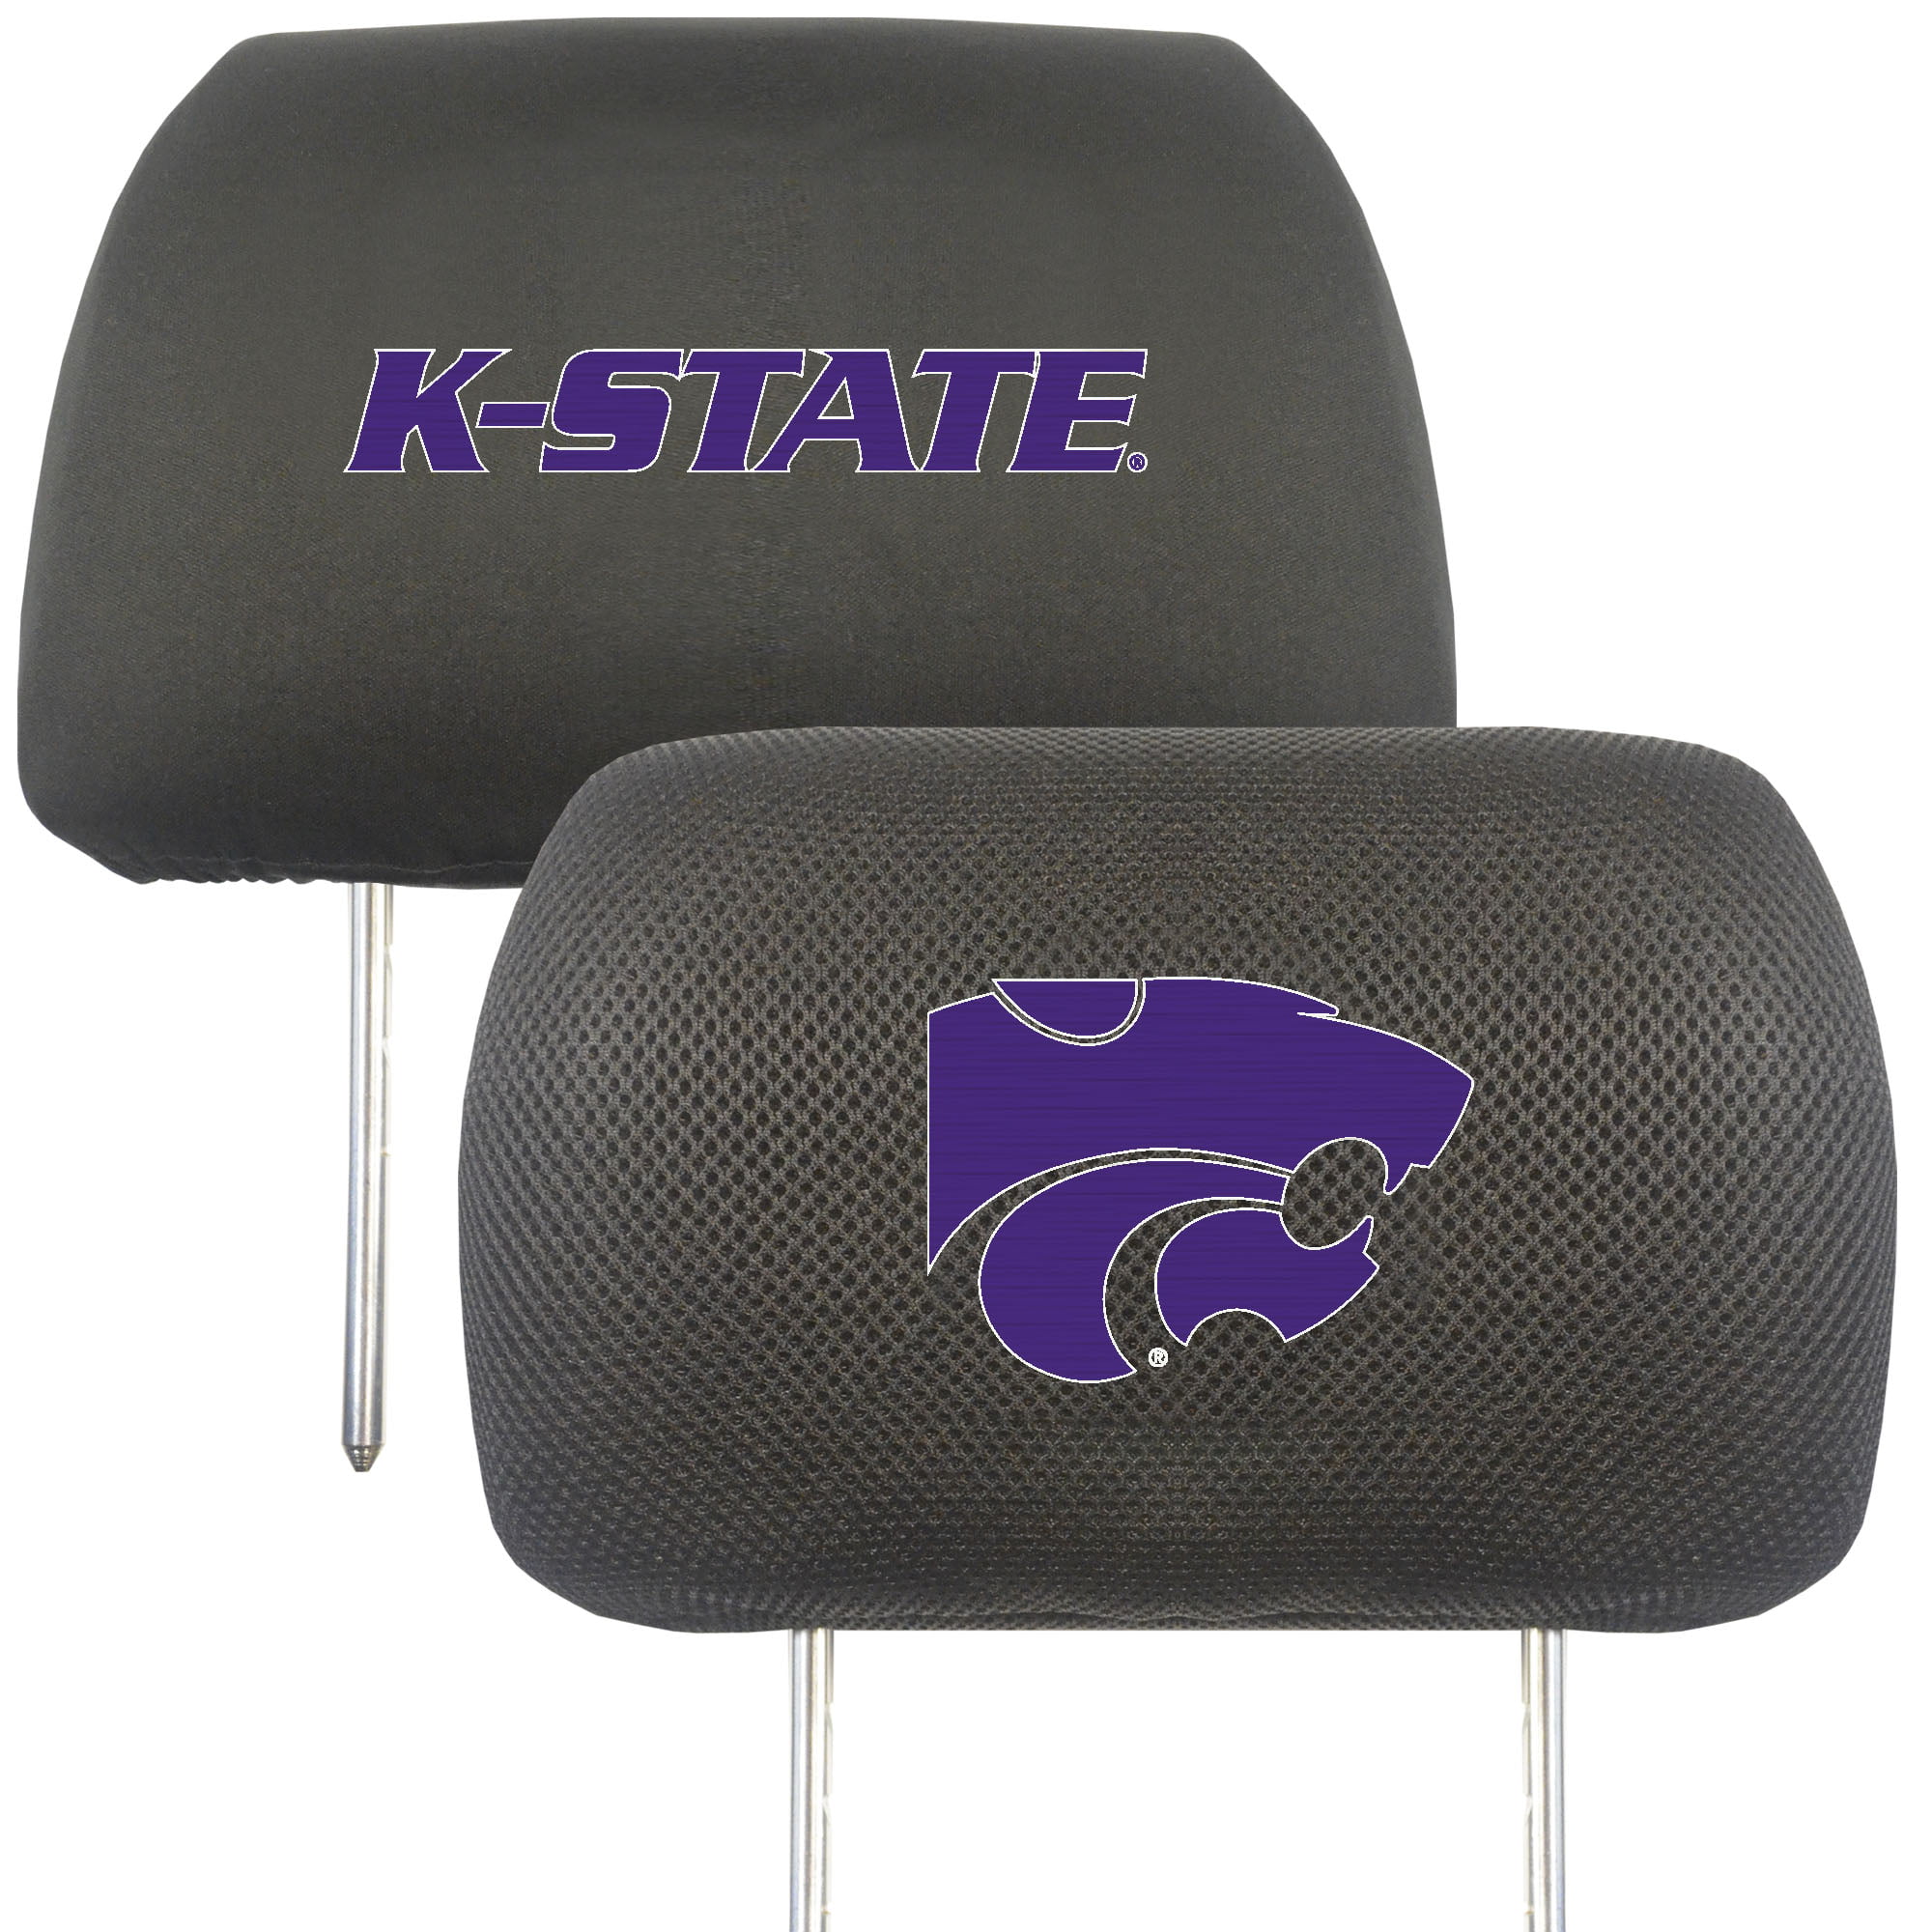 Picture of Fanmats 4228115047 NCAA Kansas State Wildcats Headrest Covers